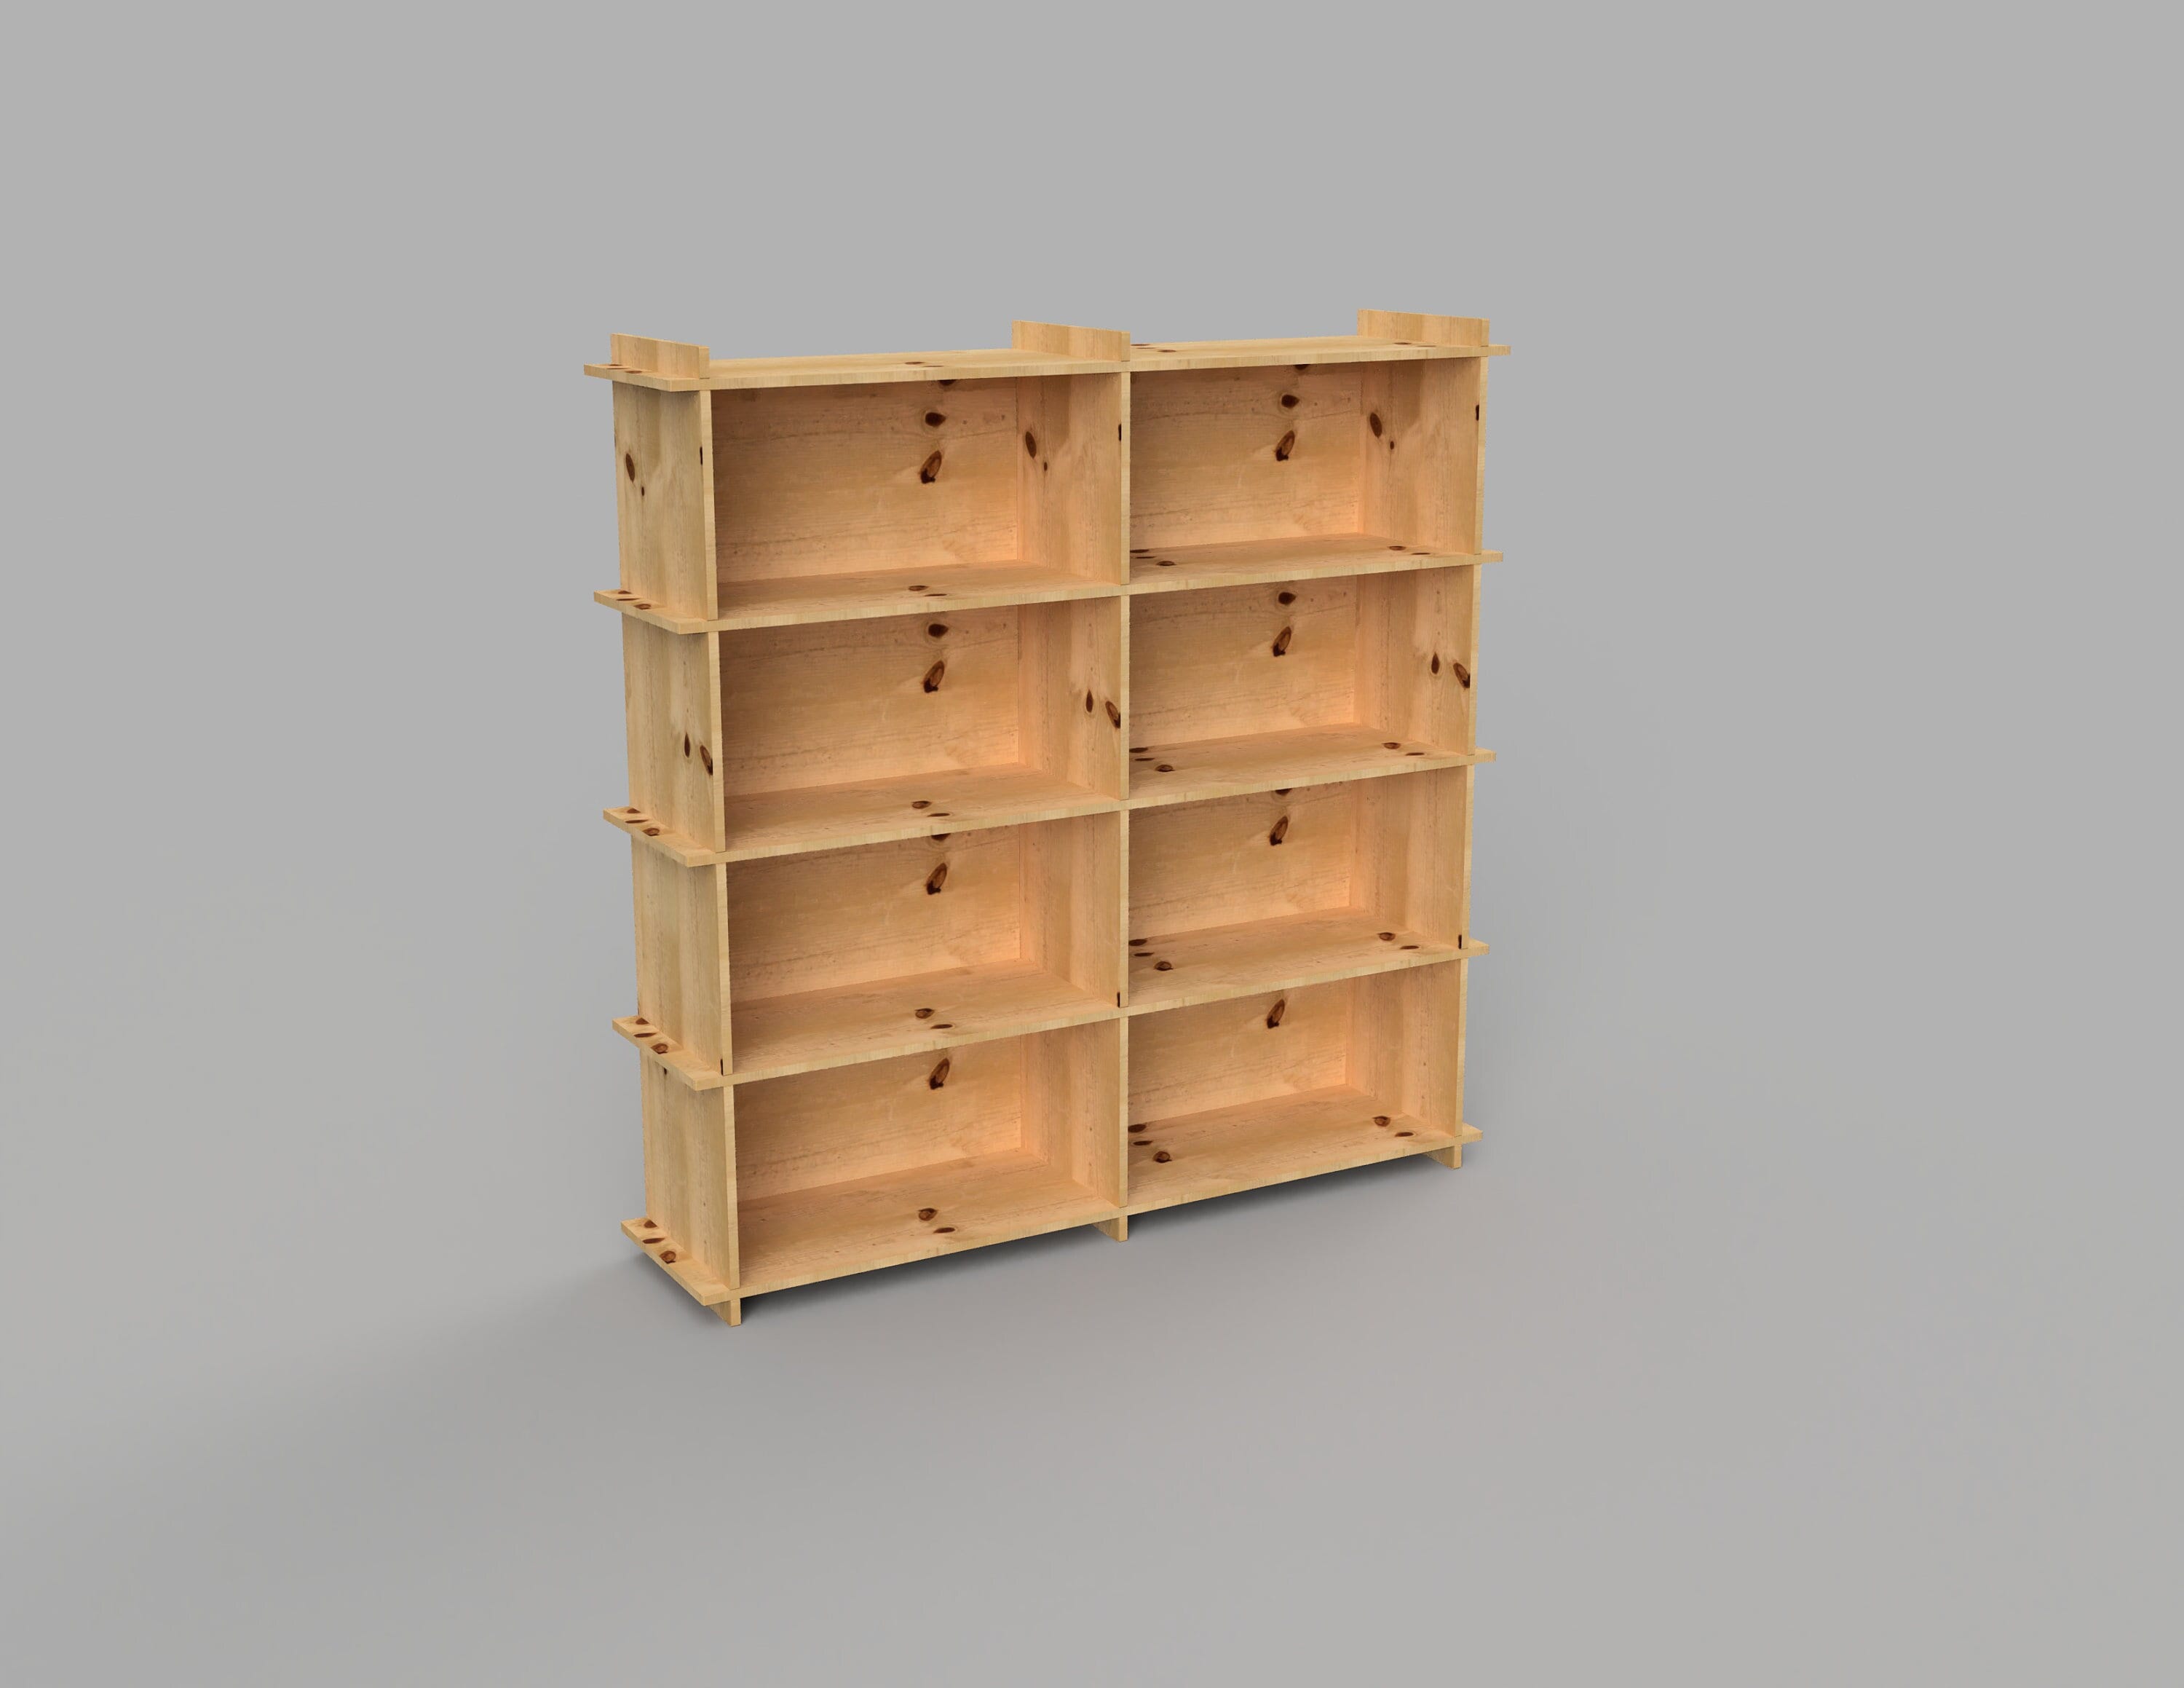 Board game shelves are here. Ditch the bookcase with a modular,  customizable, stylish way to store your board games.